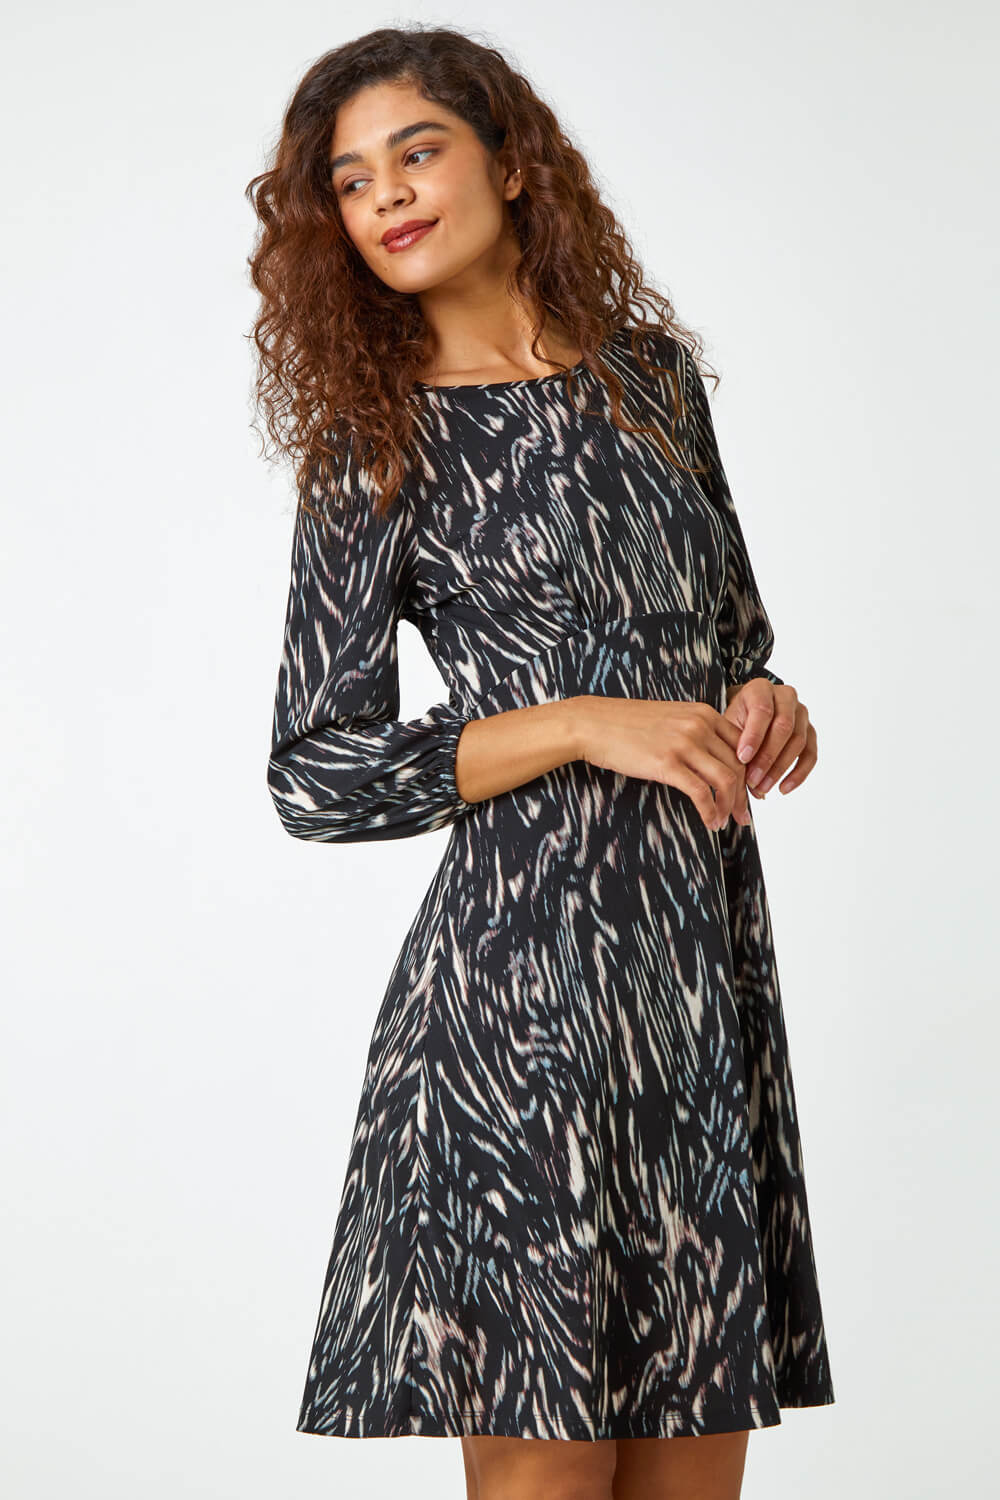 Black Abstract Print Stretch Swing Dress, Image 2 of 5